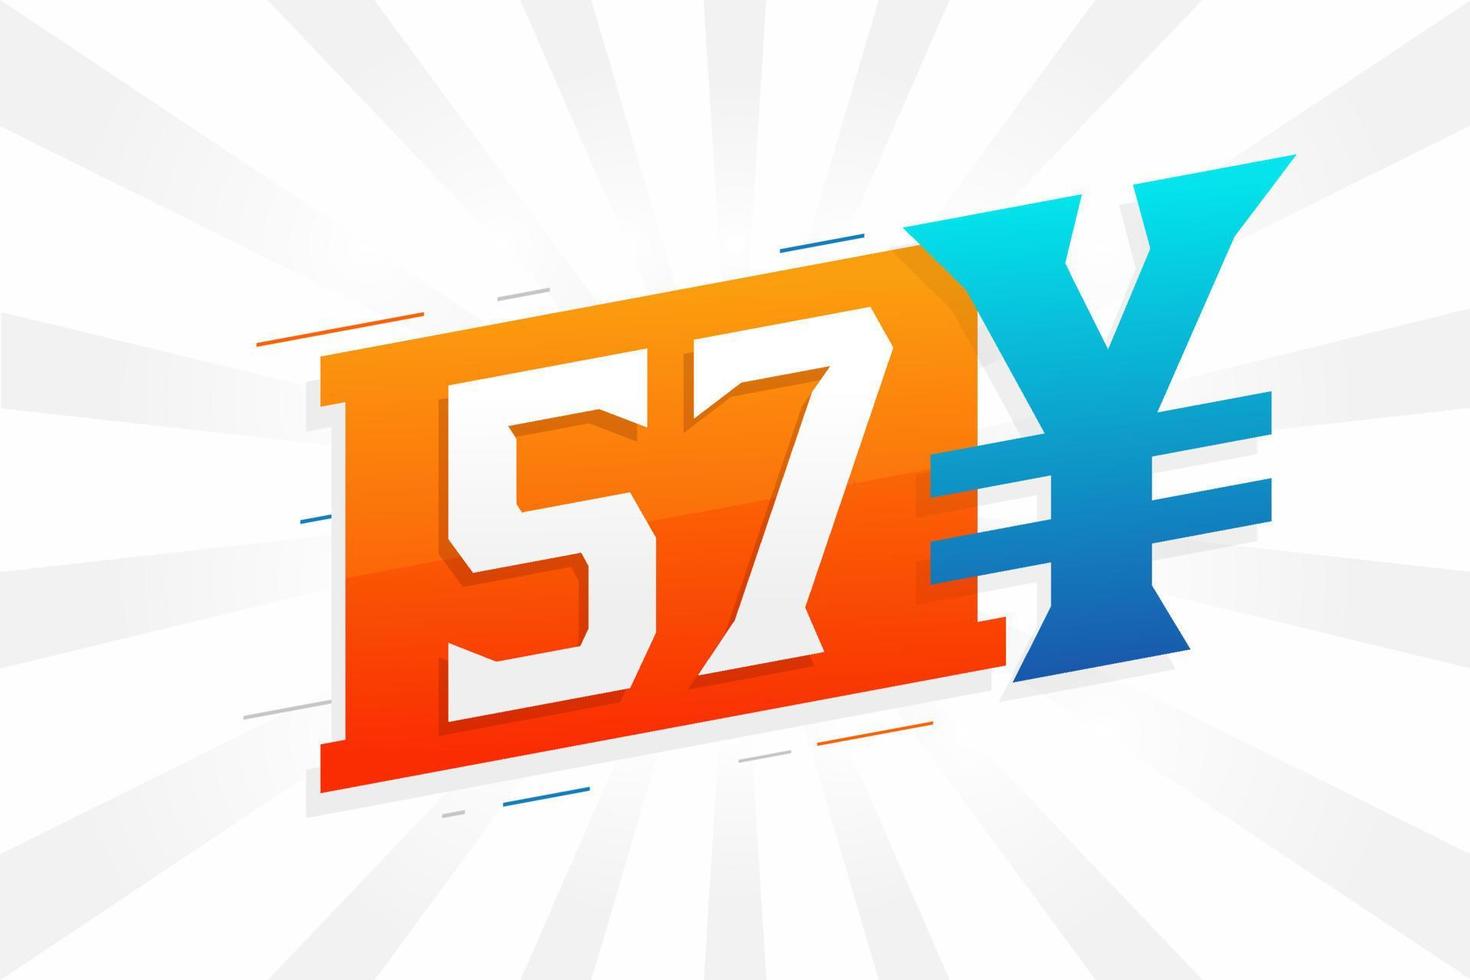 57 Yuan Chinese currency vector text symbol. 57 Yen Japanese currency Money stock vector